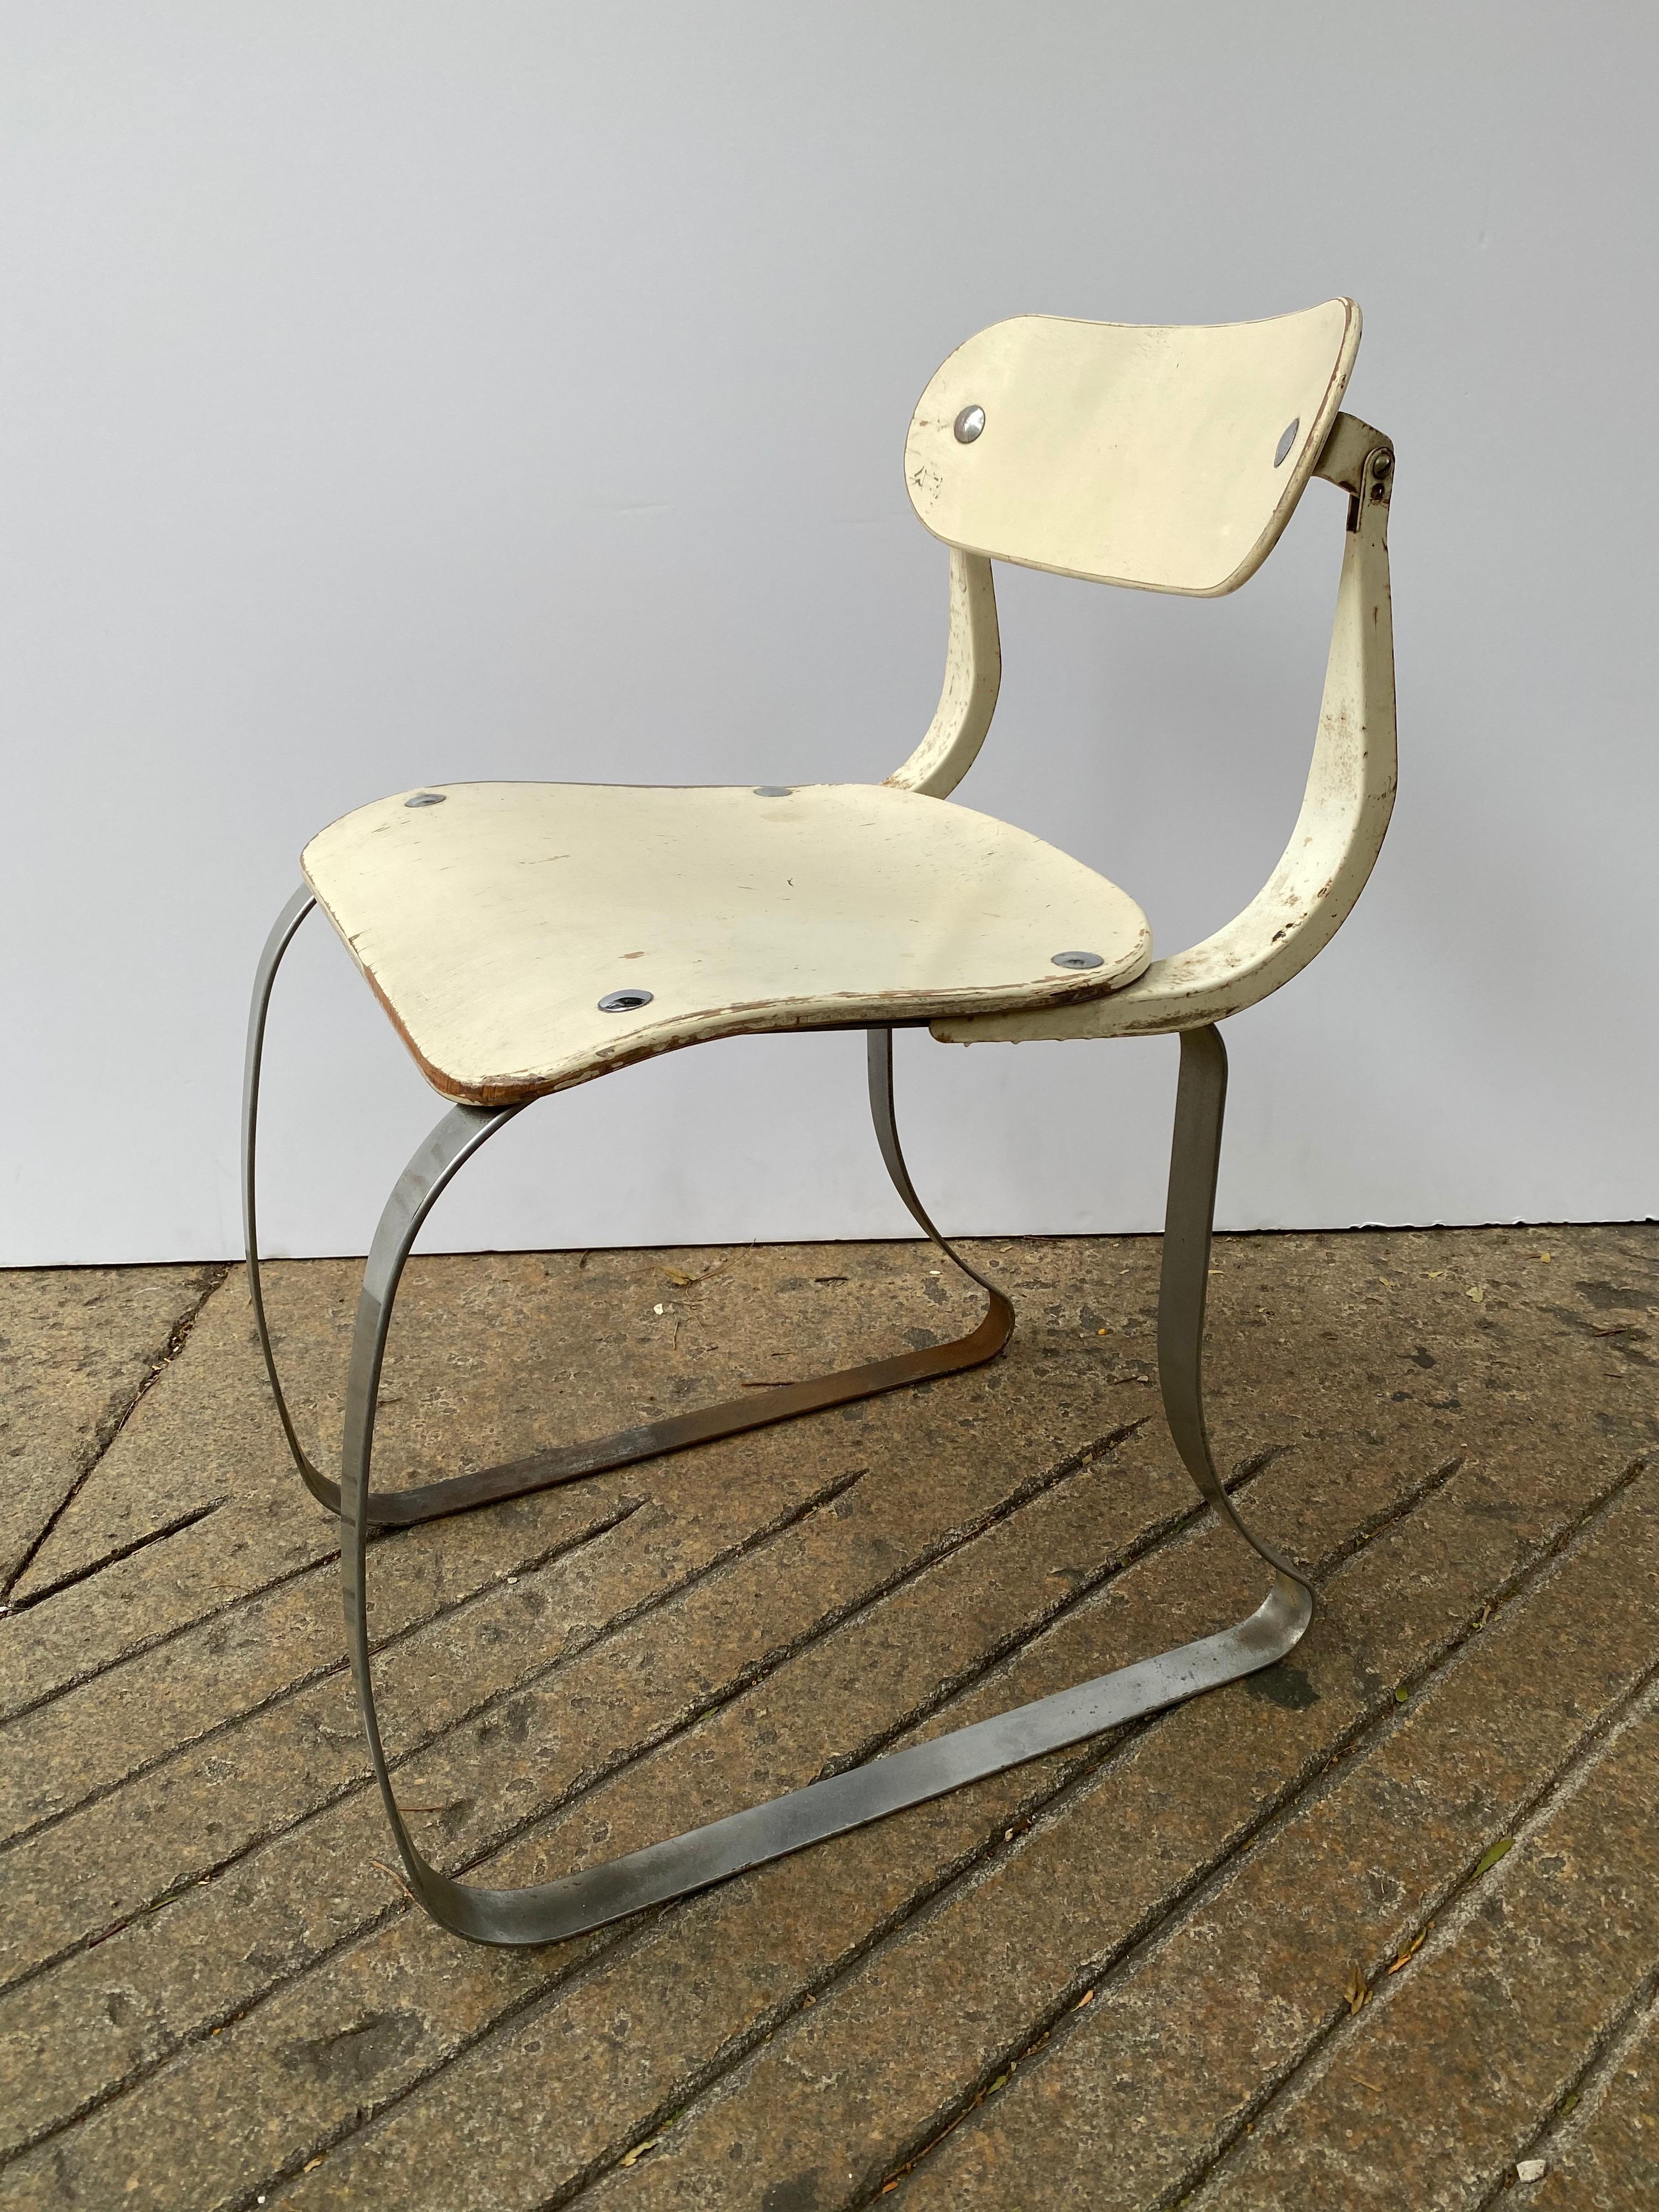 Herman A. Sperlich Health chair for Ironrite. One of these chairs came with every Ironrite Pressing Machine. Designed in 1937. Classic Industrial Modern Design. Shows wear with plating loss to base. original Paint shows great Patina! Retains